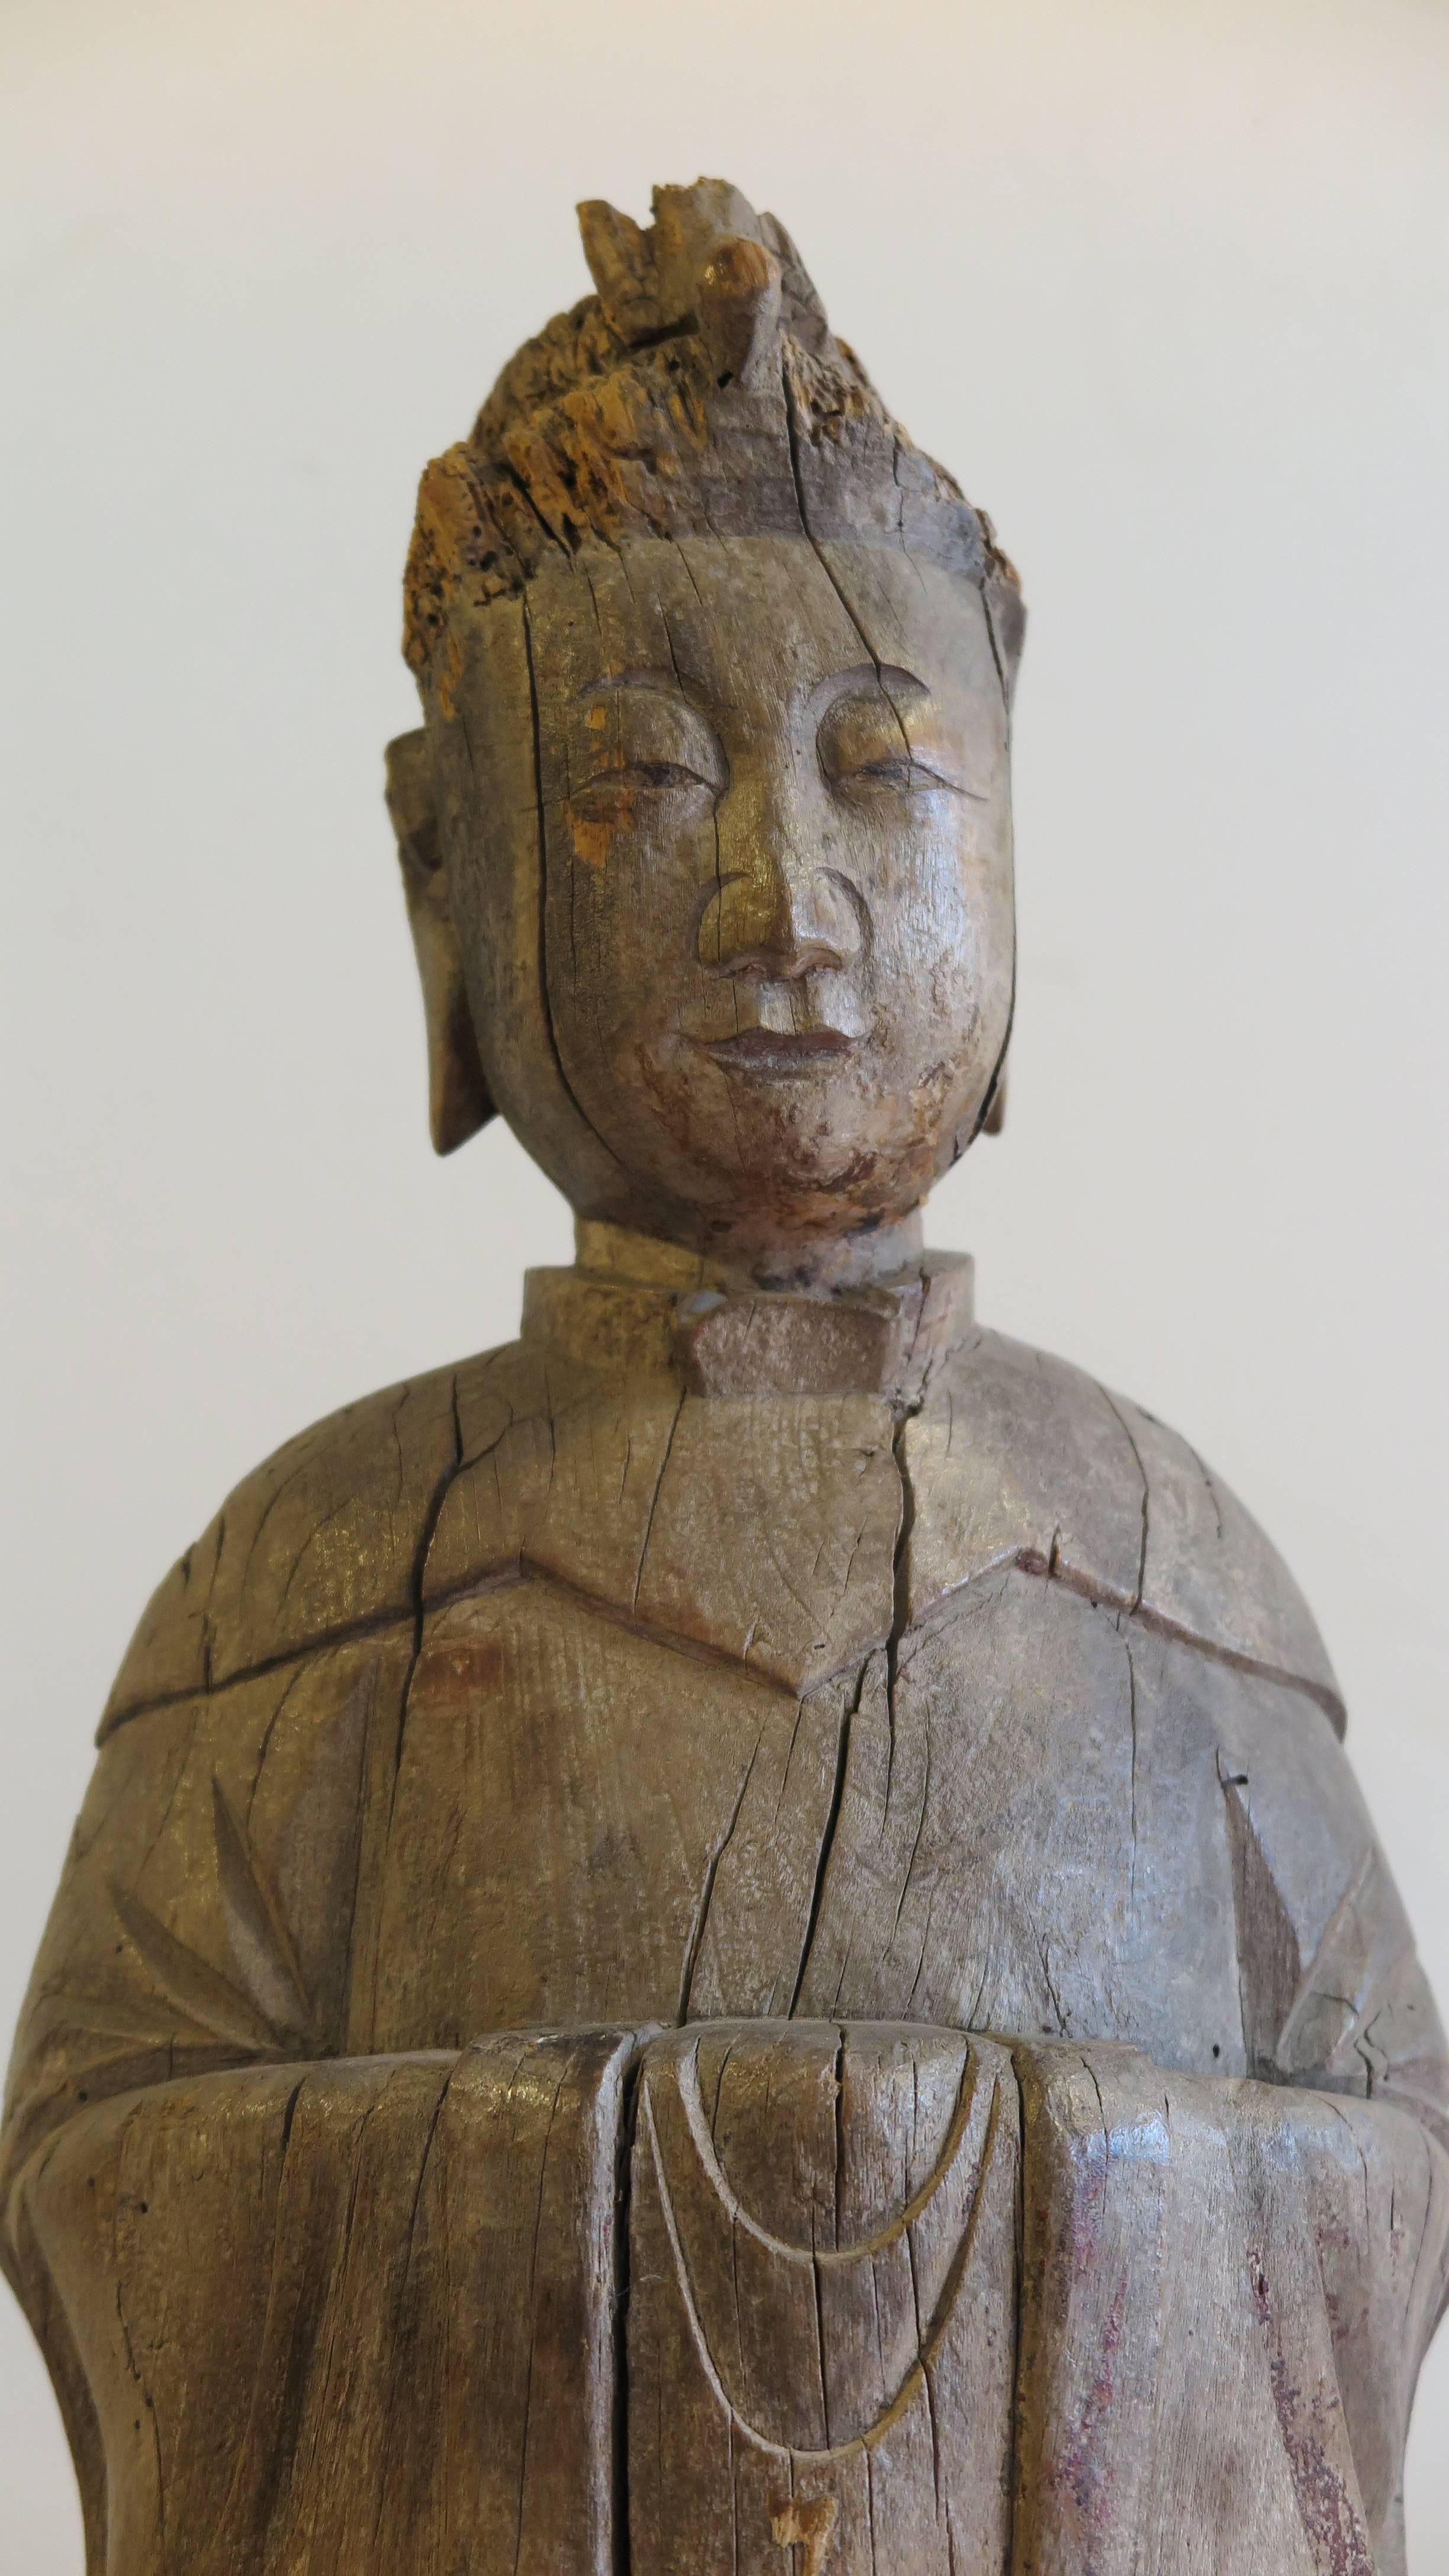 19th century Buddhist statue sculpture. A rare representation with a dove resting on head or as headdress. A majestic serene sculpture with significant presence and beauty. A solid one piece wood block carving, Hunan Province, Southern China, circa